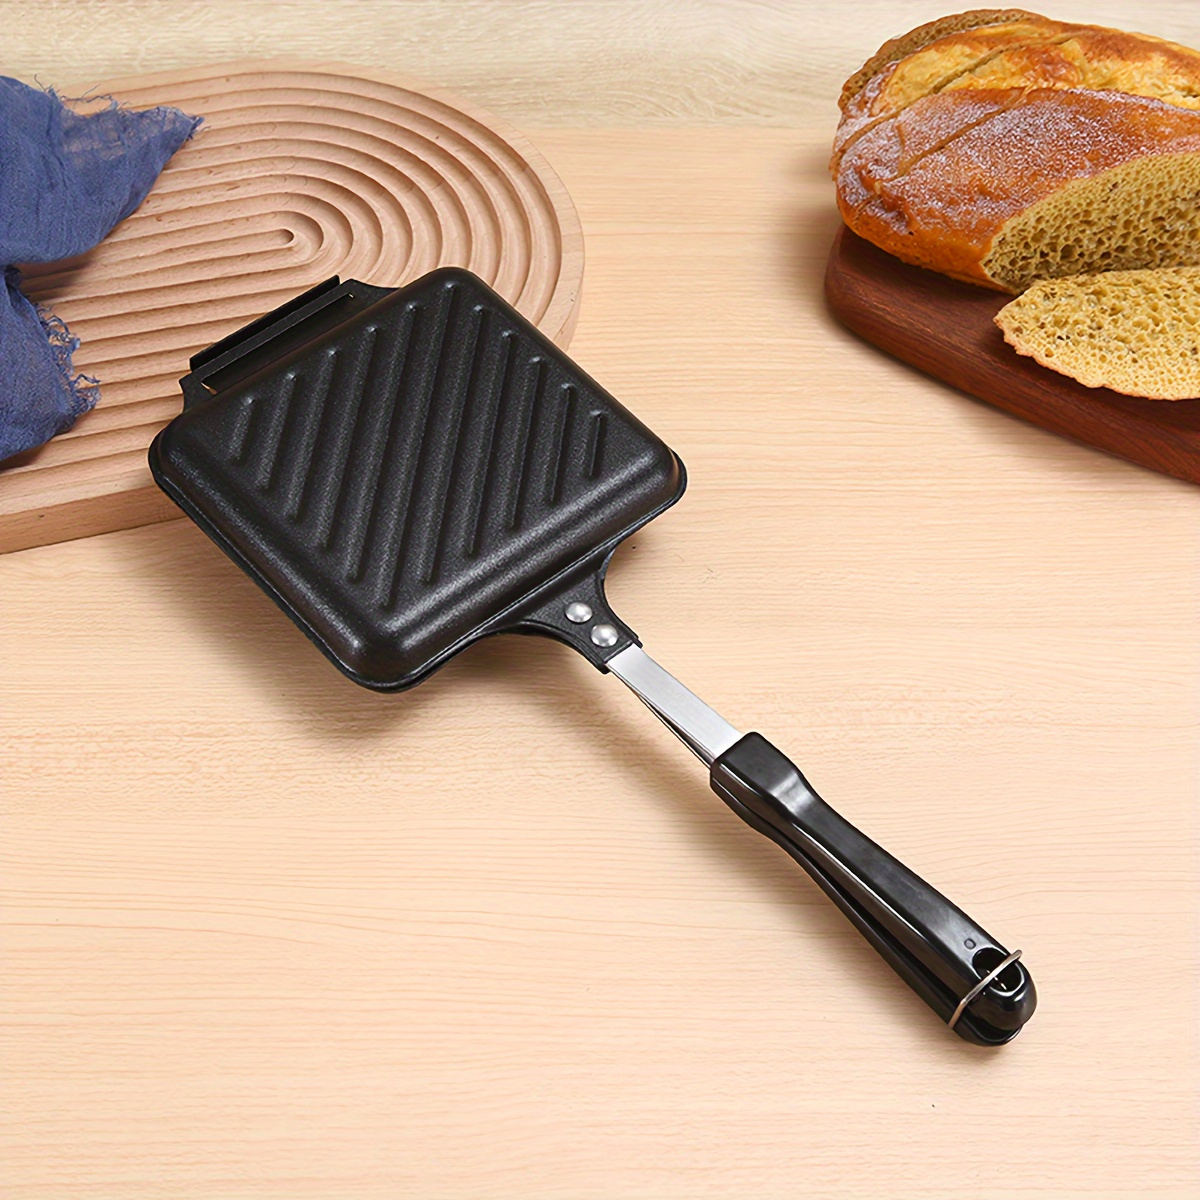 Sandwich Grill Roasting Net Oven Toast Mold Stainless Steel Baking Pans  Bread Machine Tool Household Microwave toasted maker - AliExpress